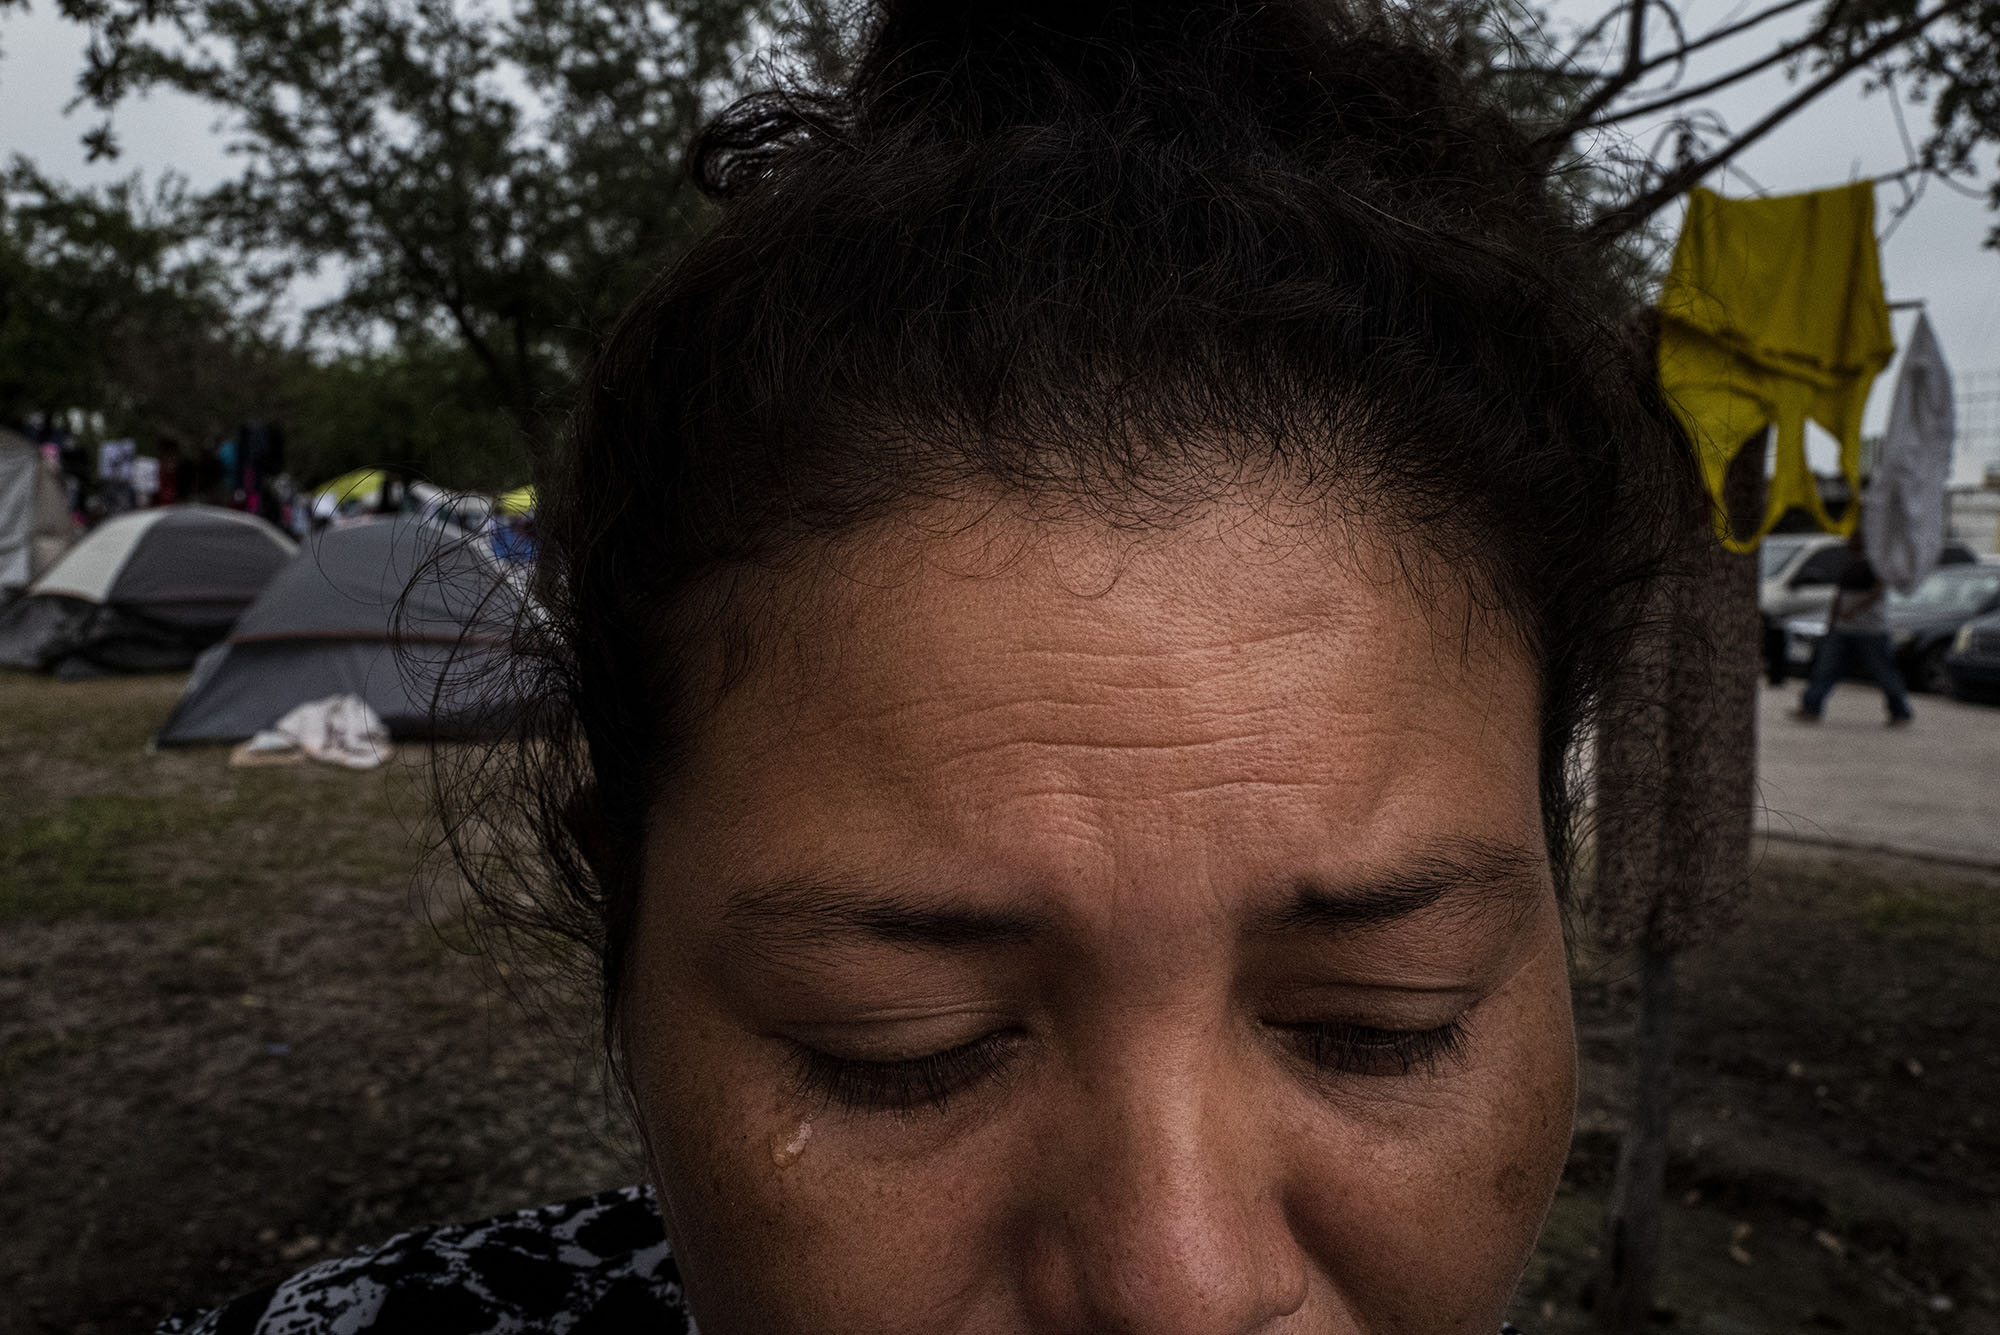 Luisa Coto, 33, left her country after receiving death threats and losing two family members. She now lives in an encampment in Reynosa. 